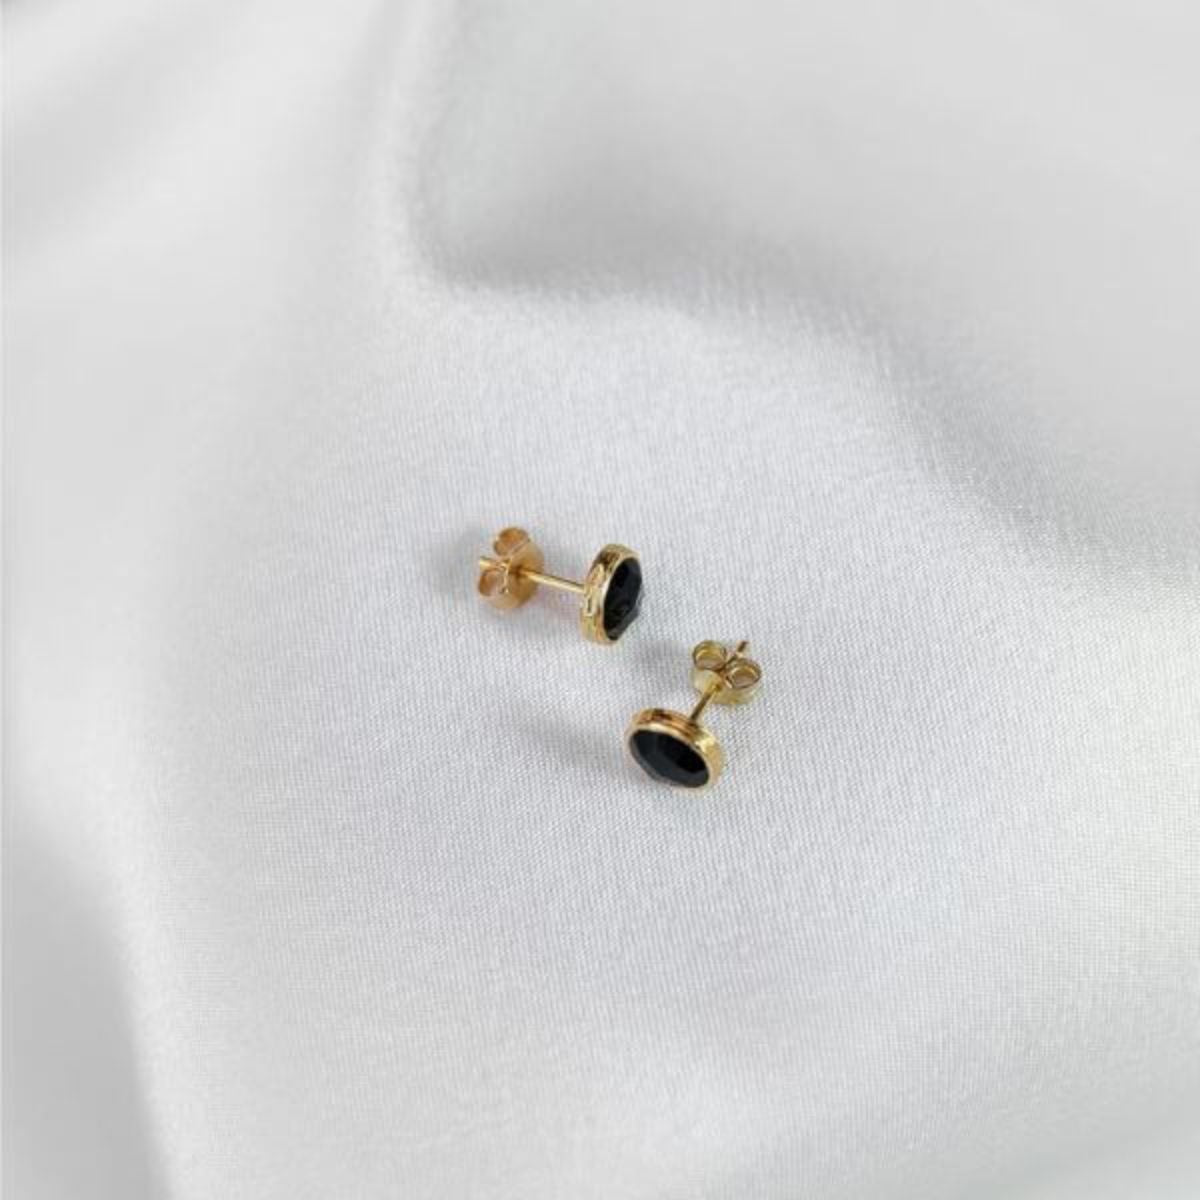 a pair of gold plated studs resting on a white cloth